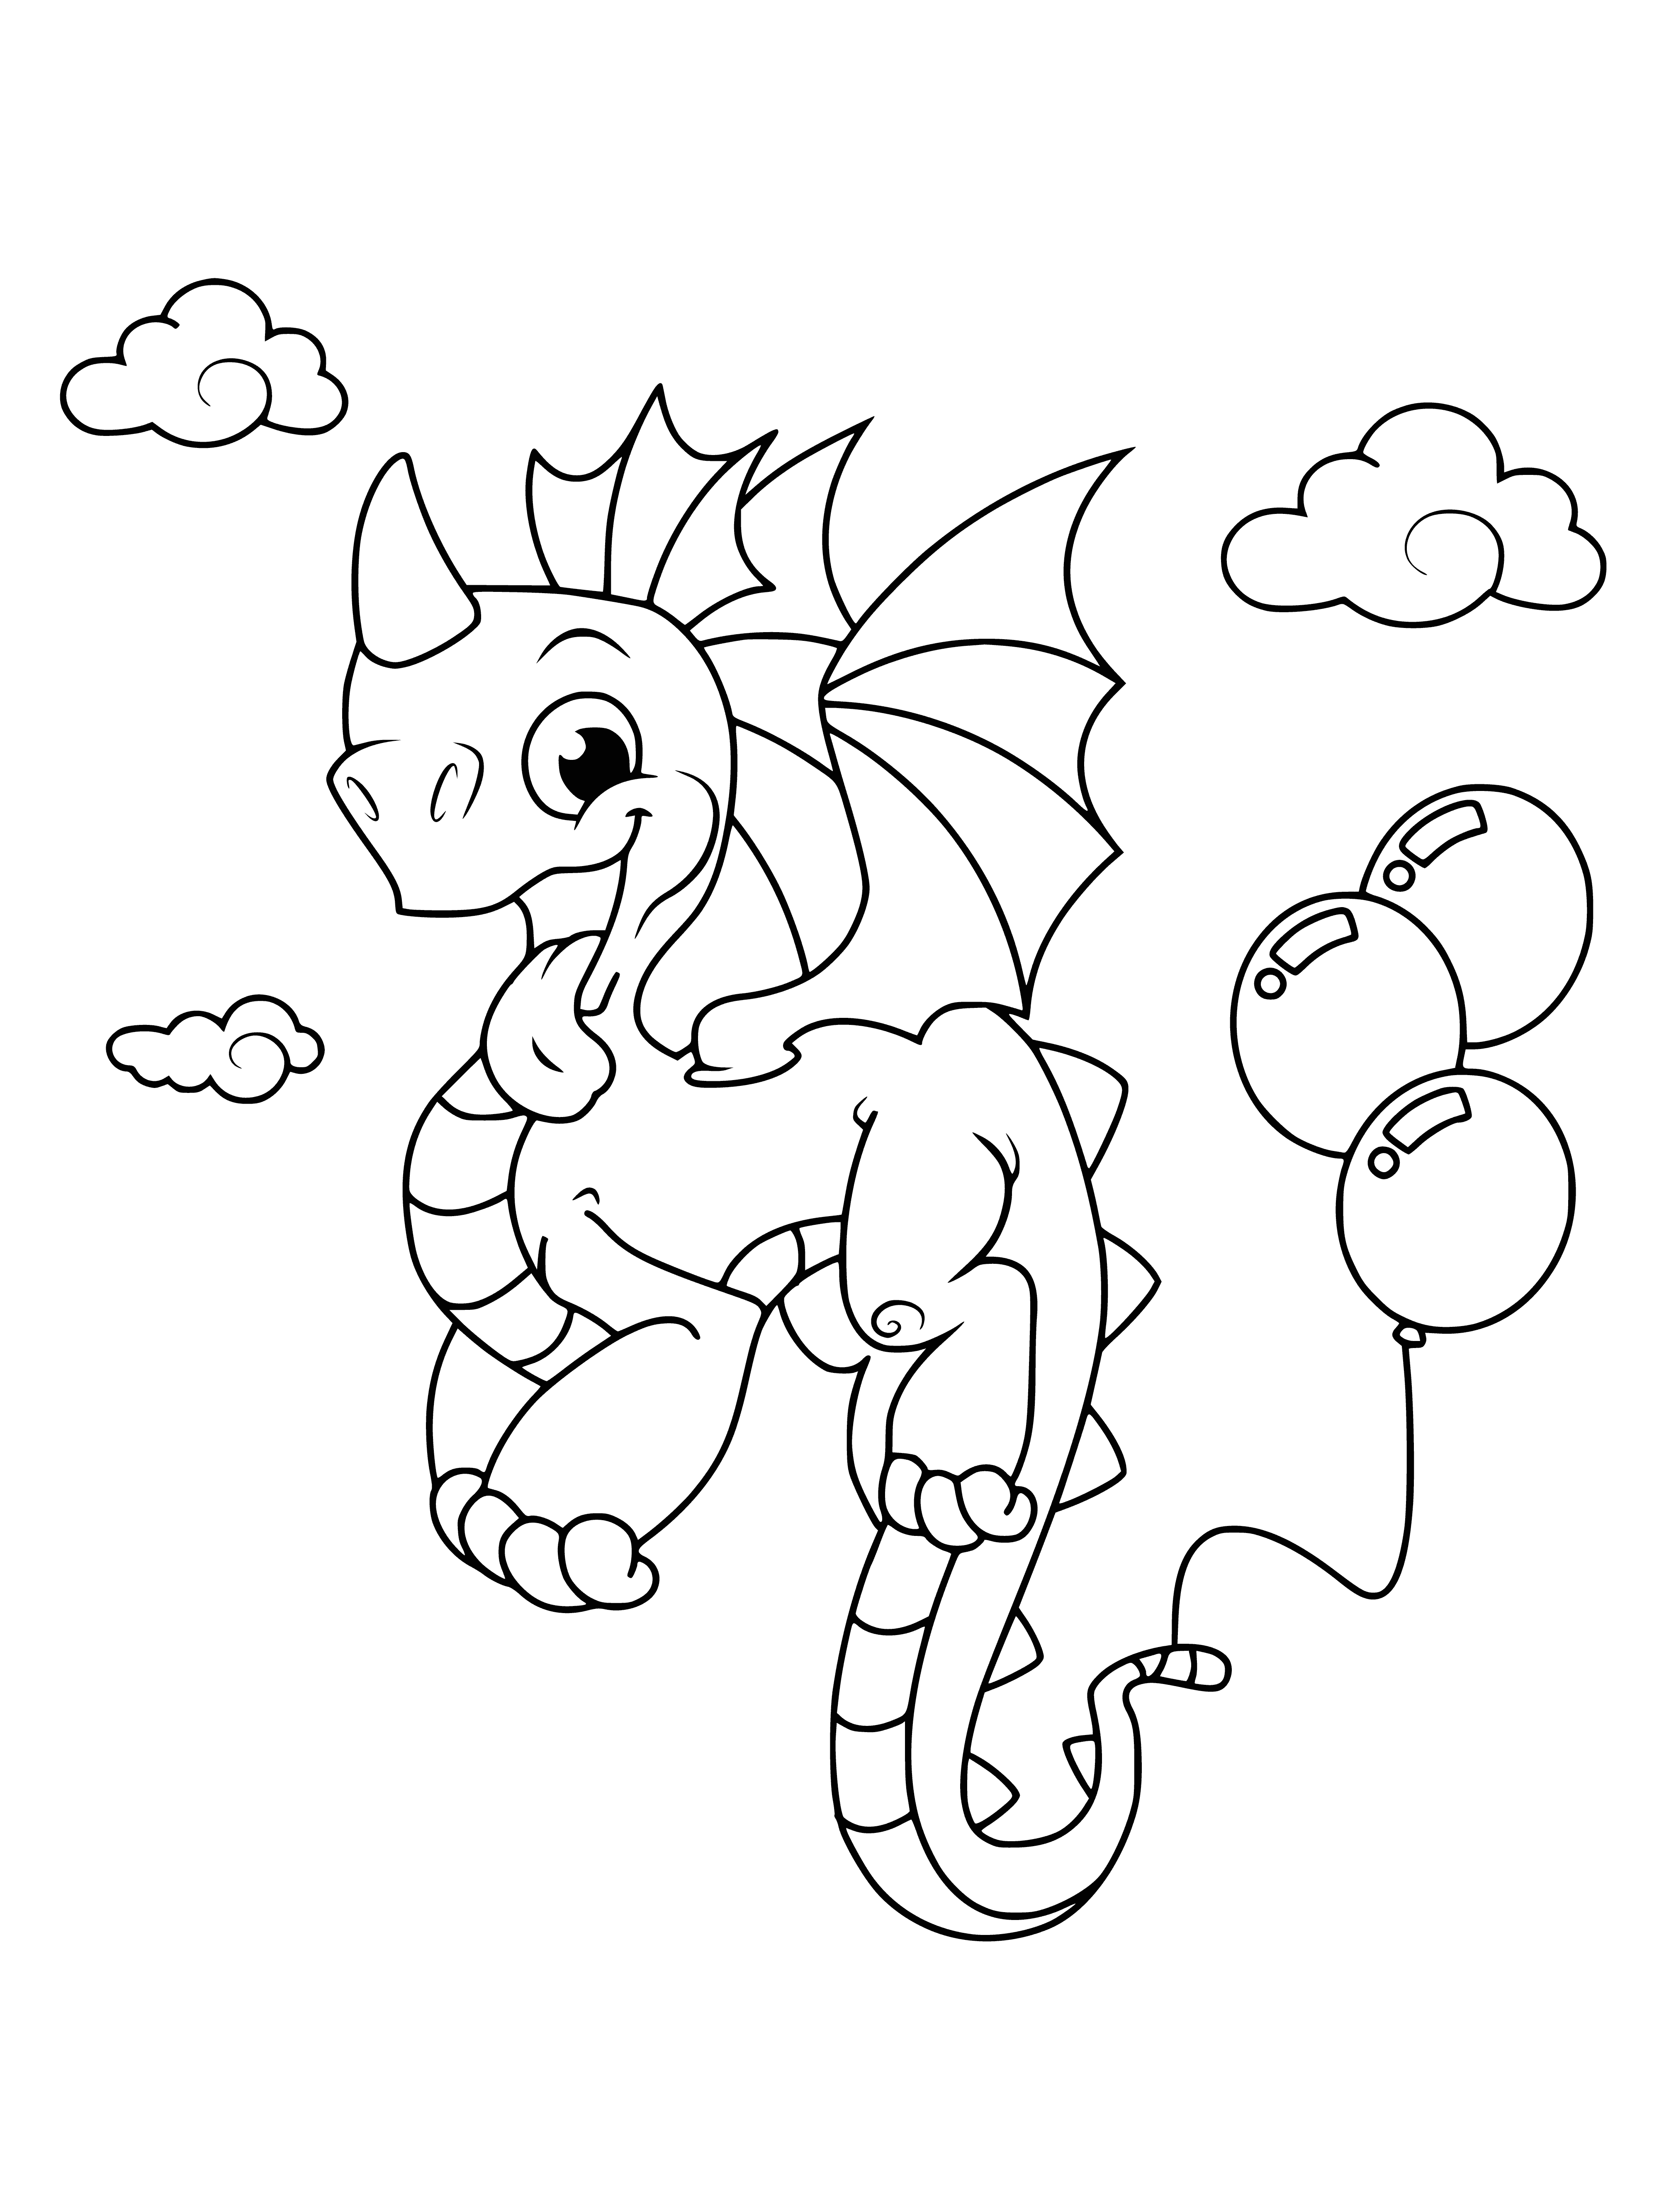 coloring page: 3 dragons: green, blue & red, all have wings & can fly.